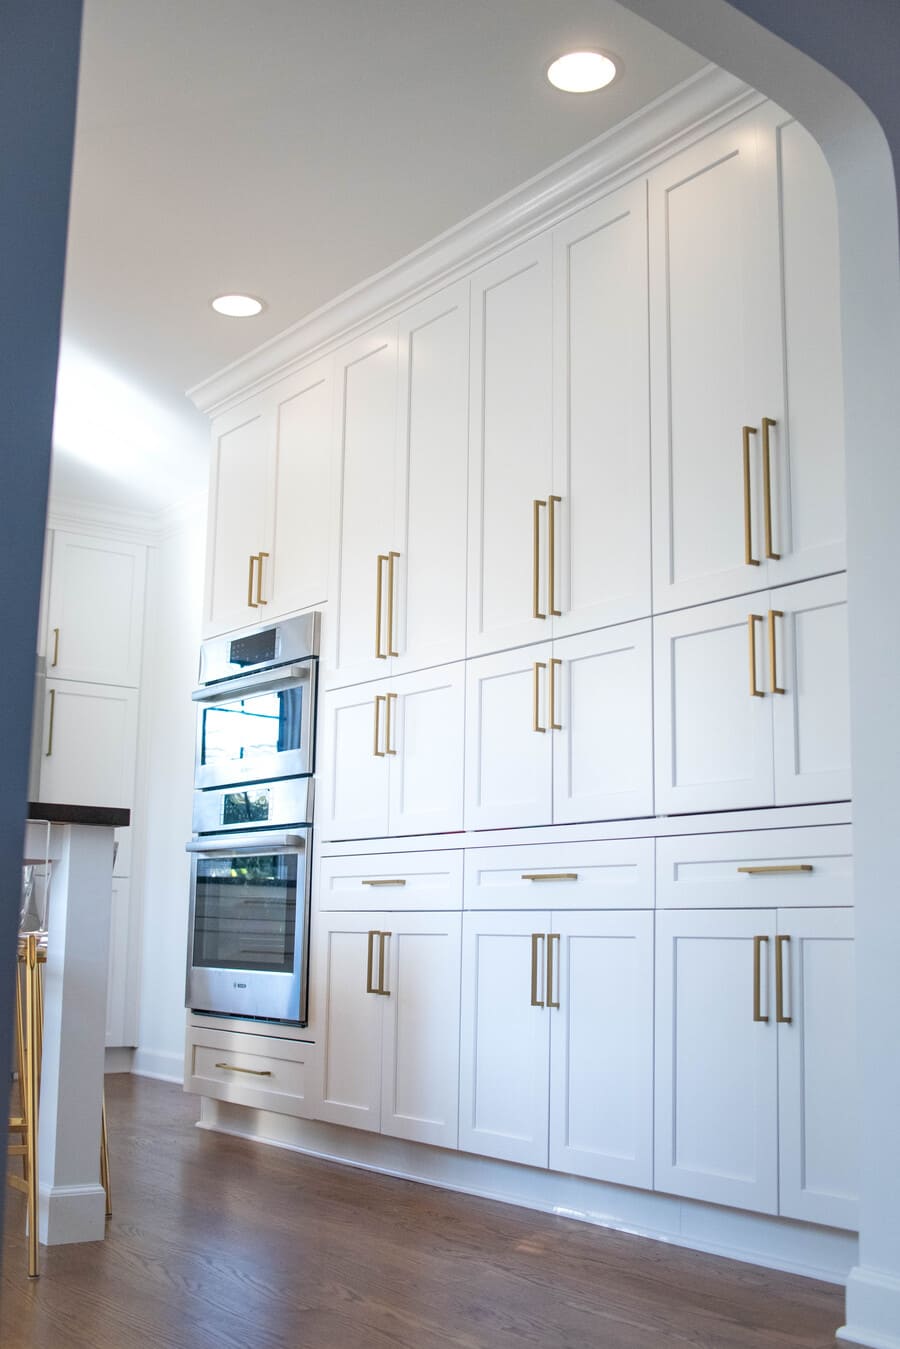 Custom floor-to-ceiling white shaker cabinets with double oven built-in South Bend kitchen remodel